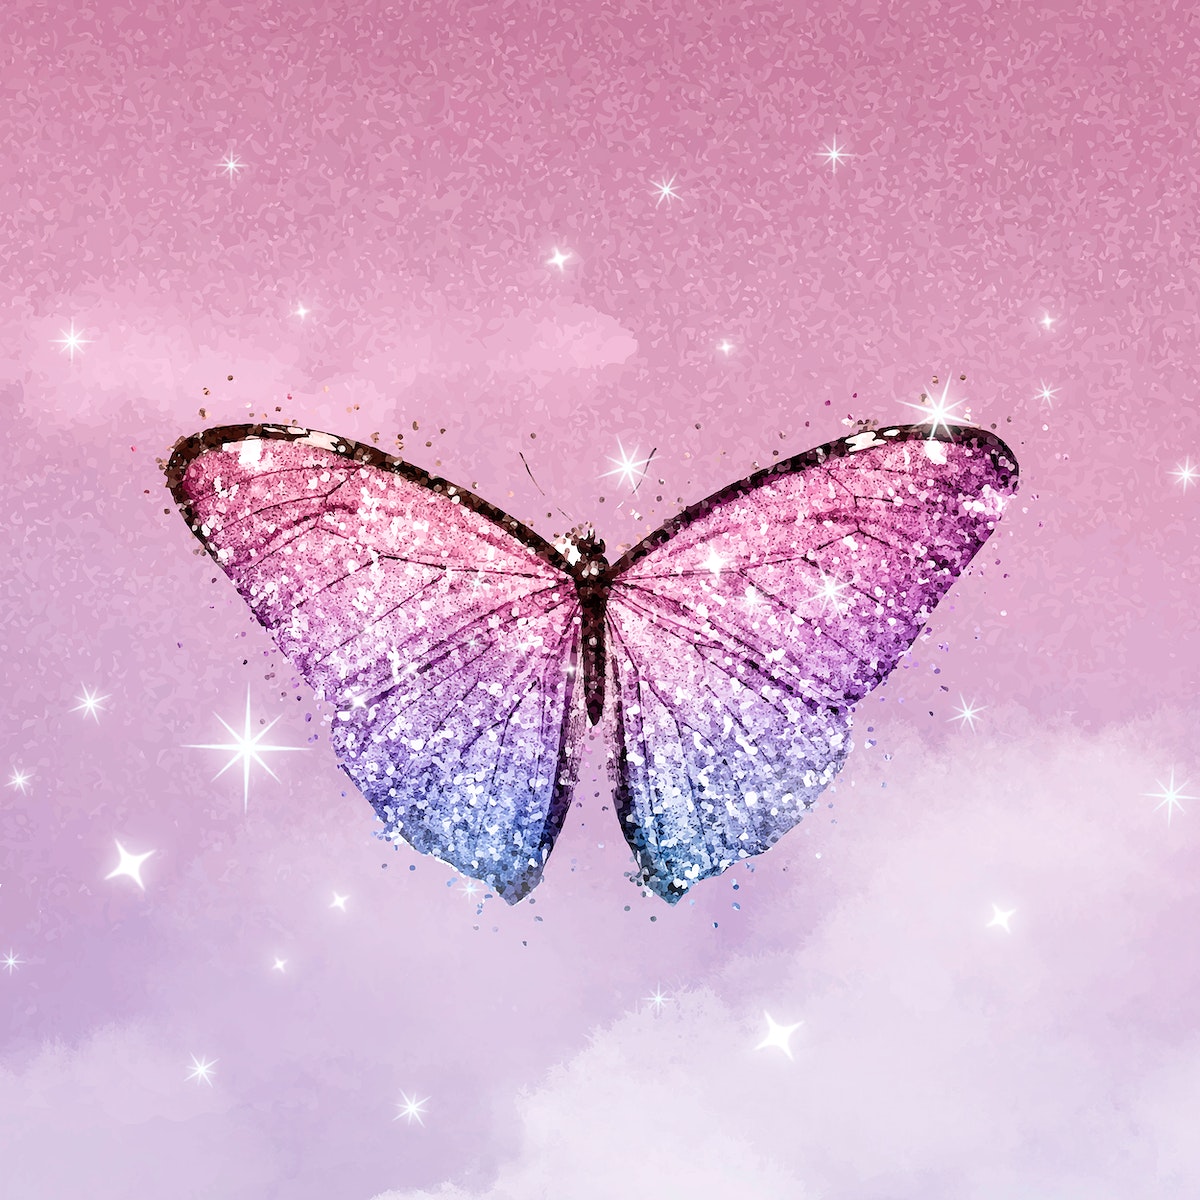 Sparkle Butterfly Image Wallpaper